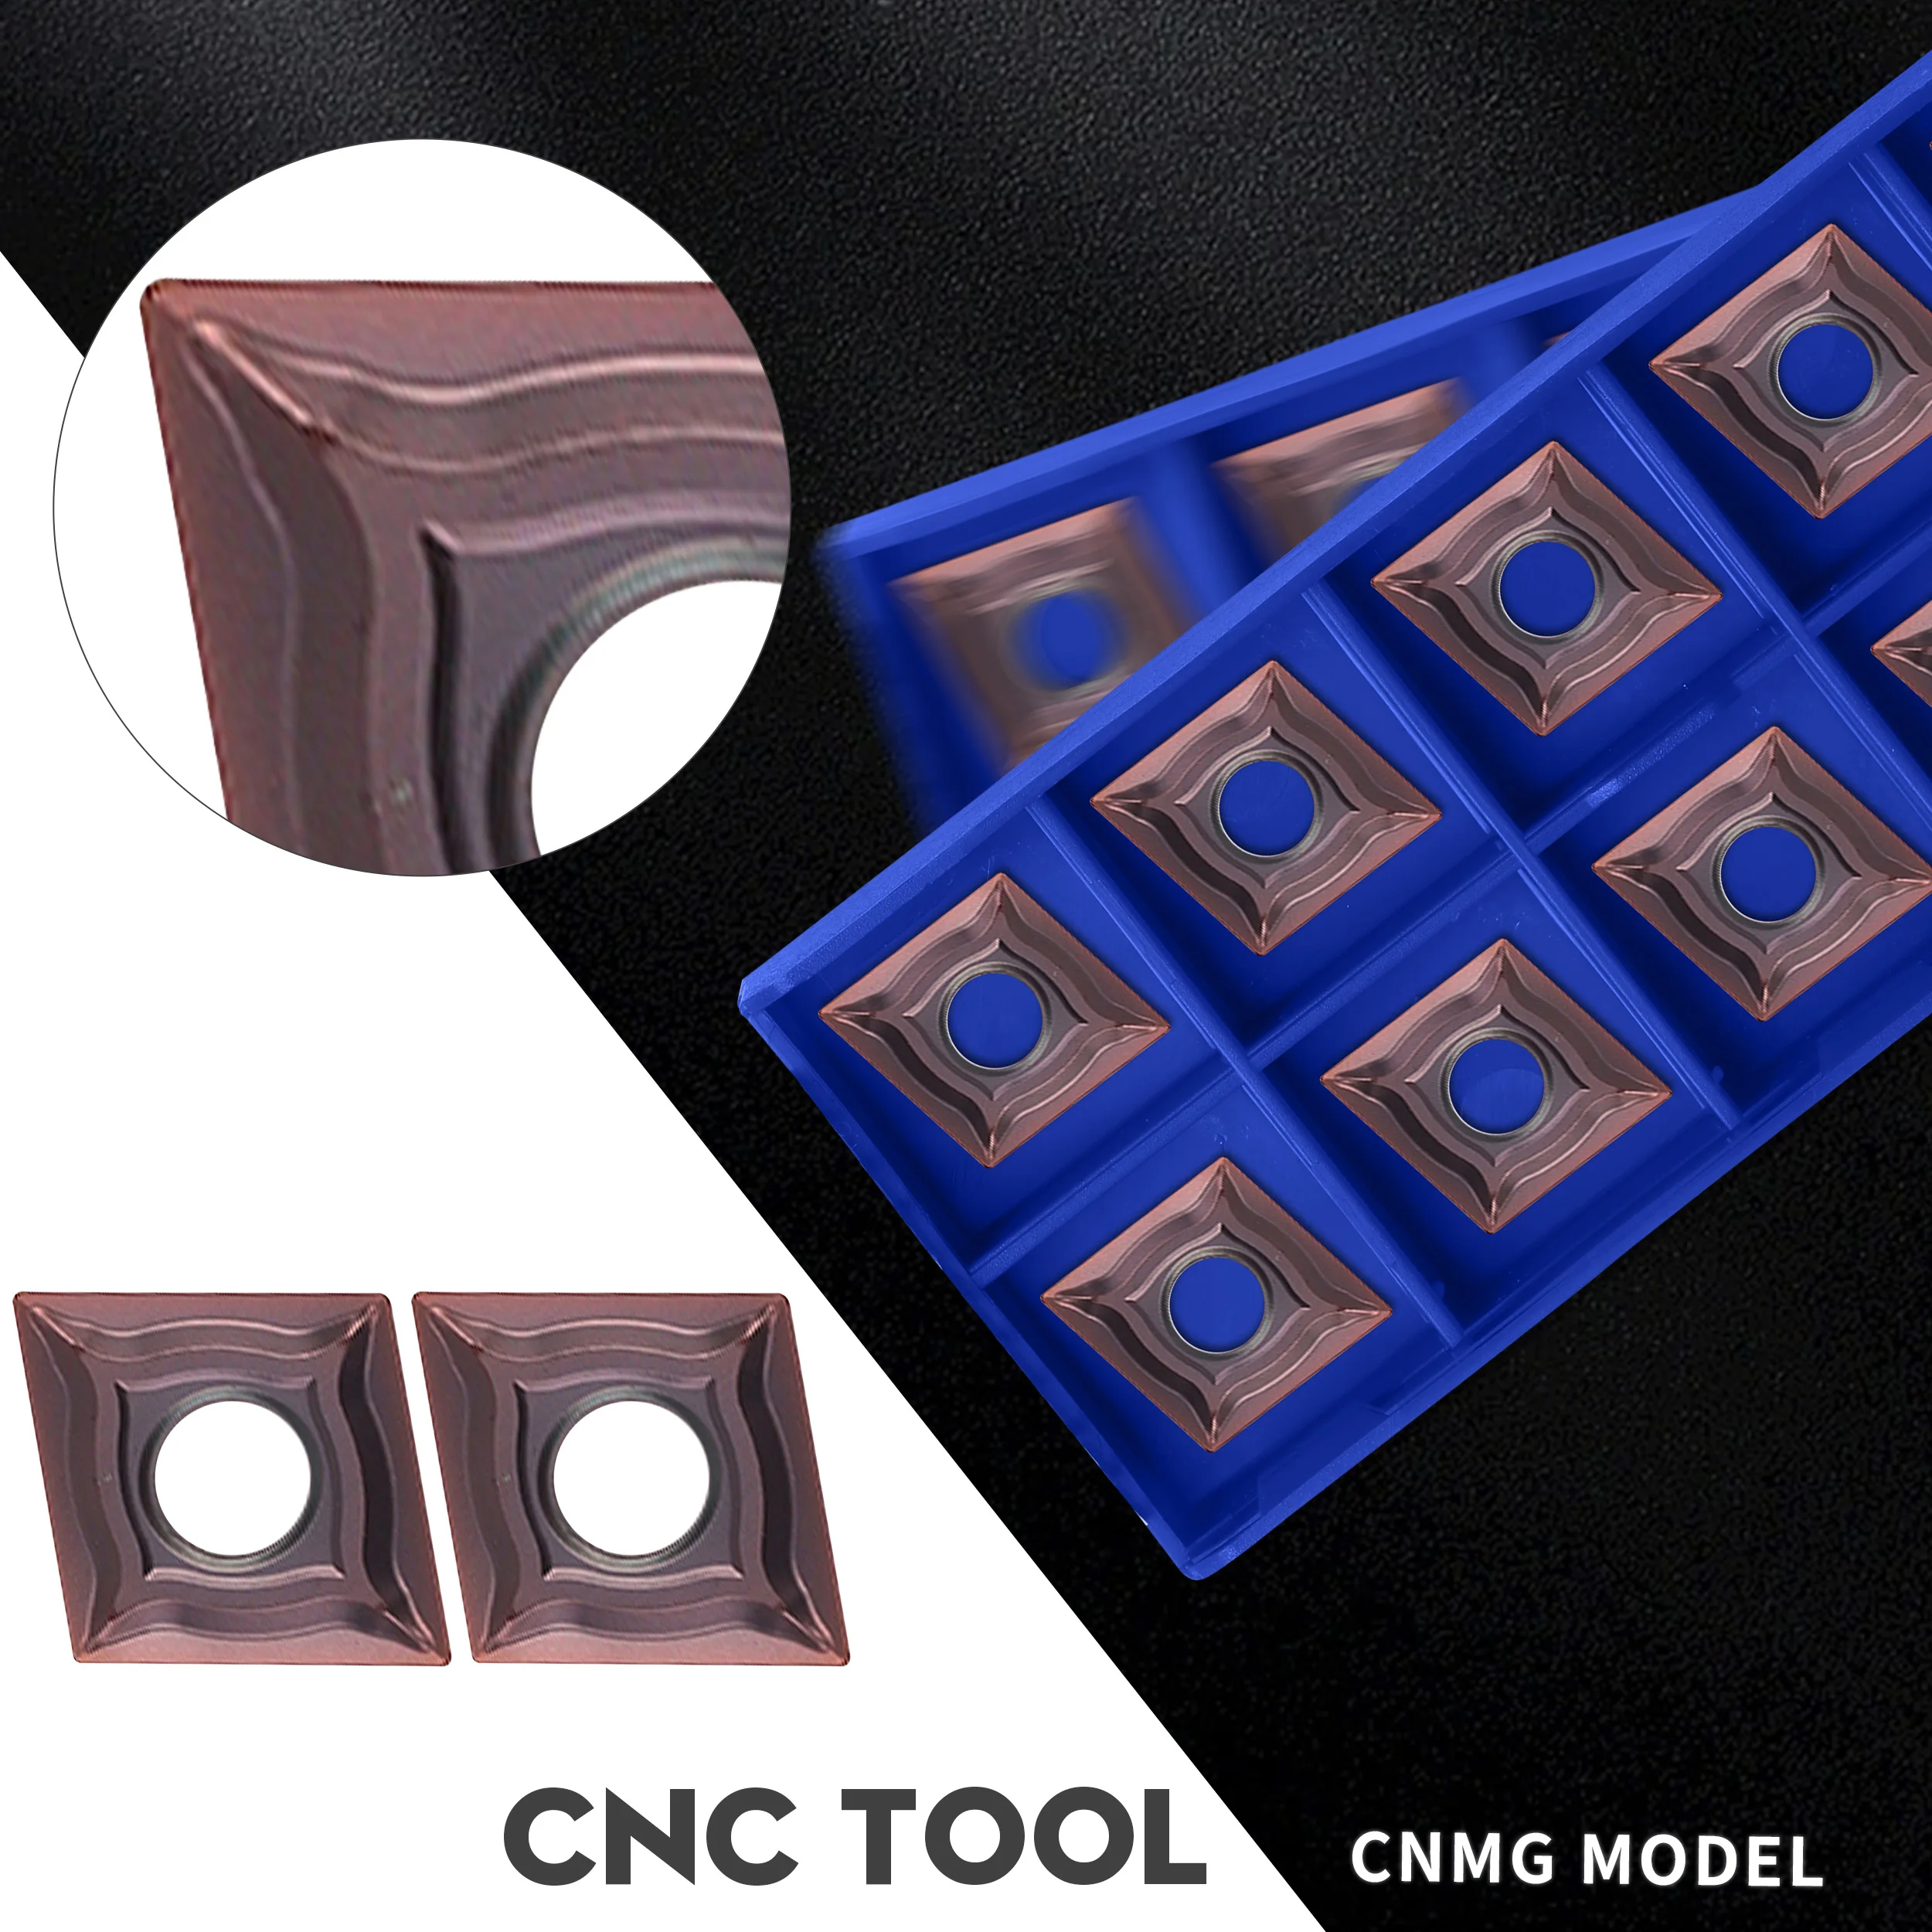 

CNMG120404-EF CNMG120408-EF YBG205 CNC lathe turning blades Carbide cutting inserts PVD coated metal inserts for stainless steel